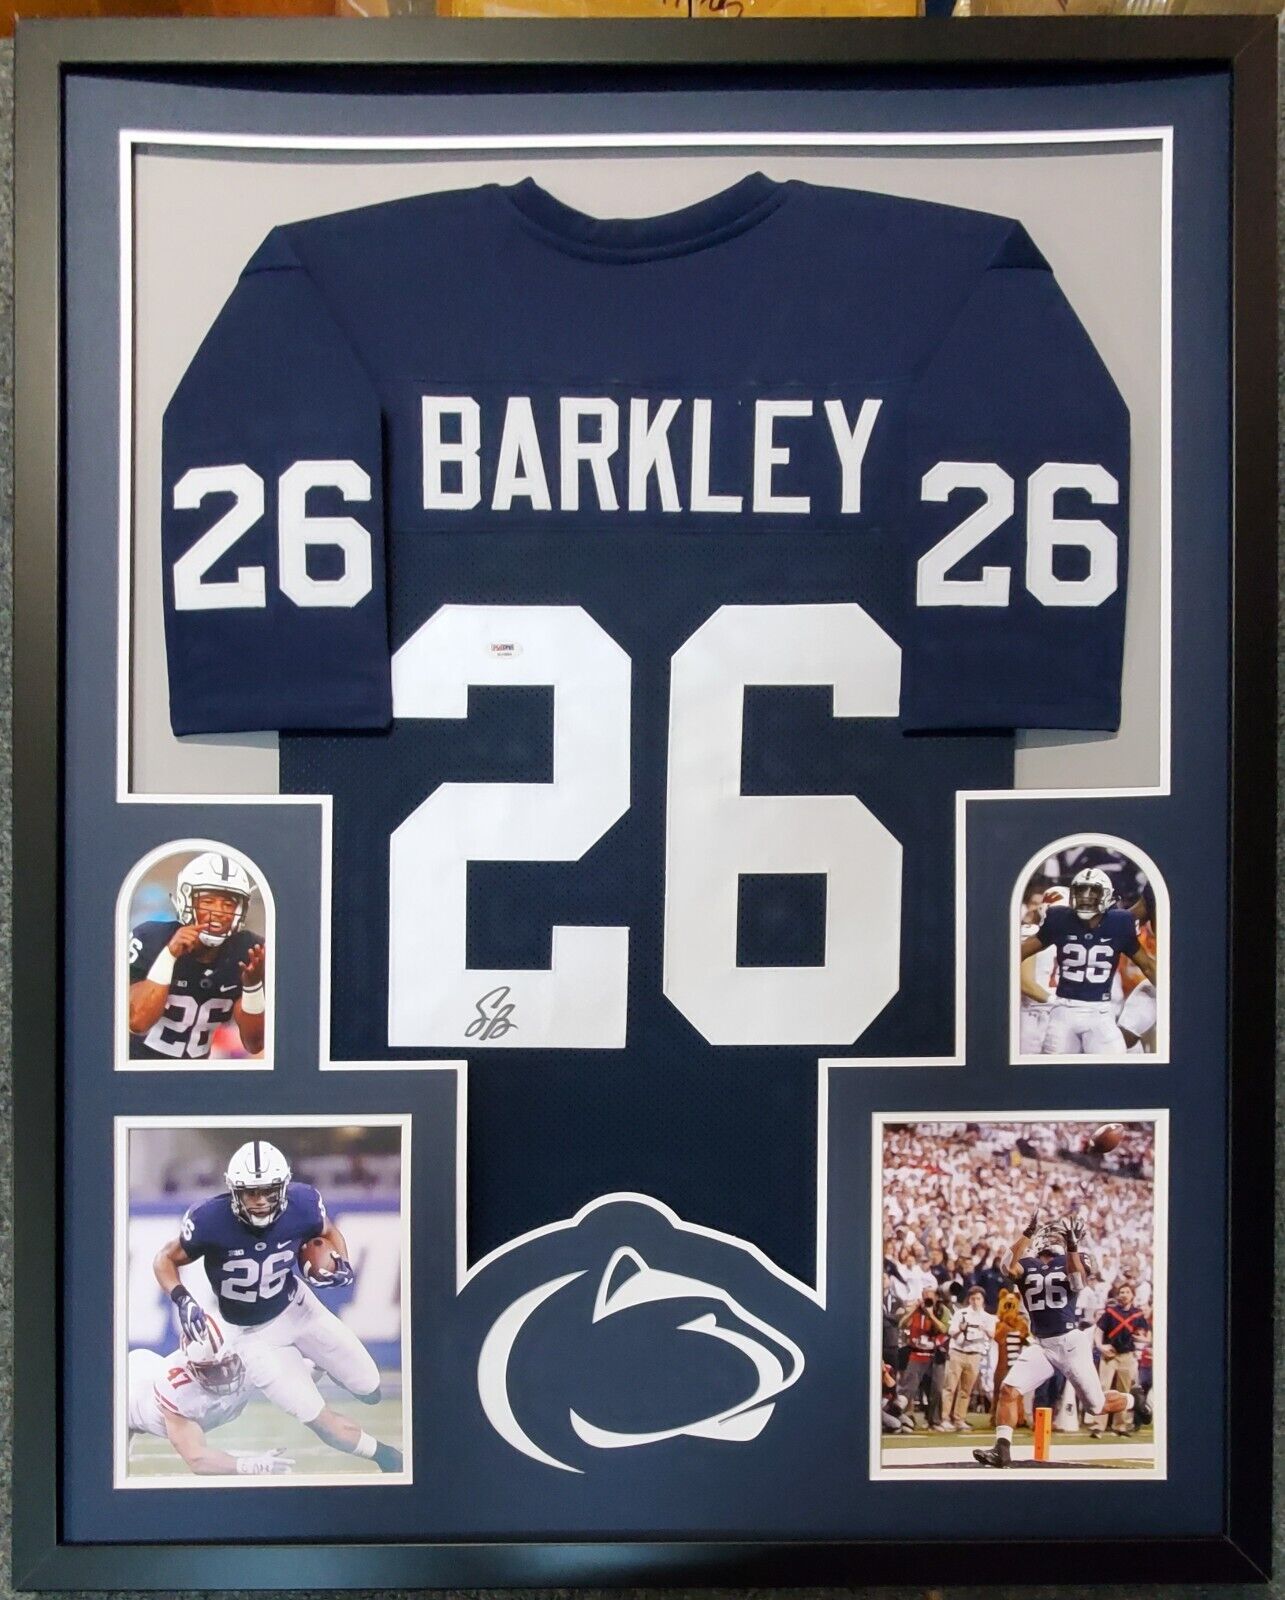 MVP Authentics Framed Penn State Nittany Lions Saquon Barkley Autographed Signed Jersey Psa Coa 539.10 sports jersey framing , jersey framing